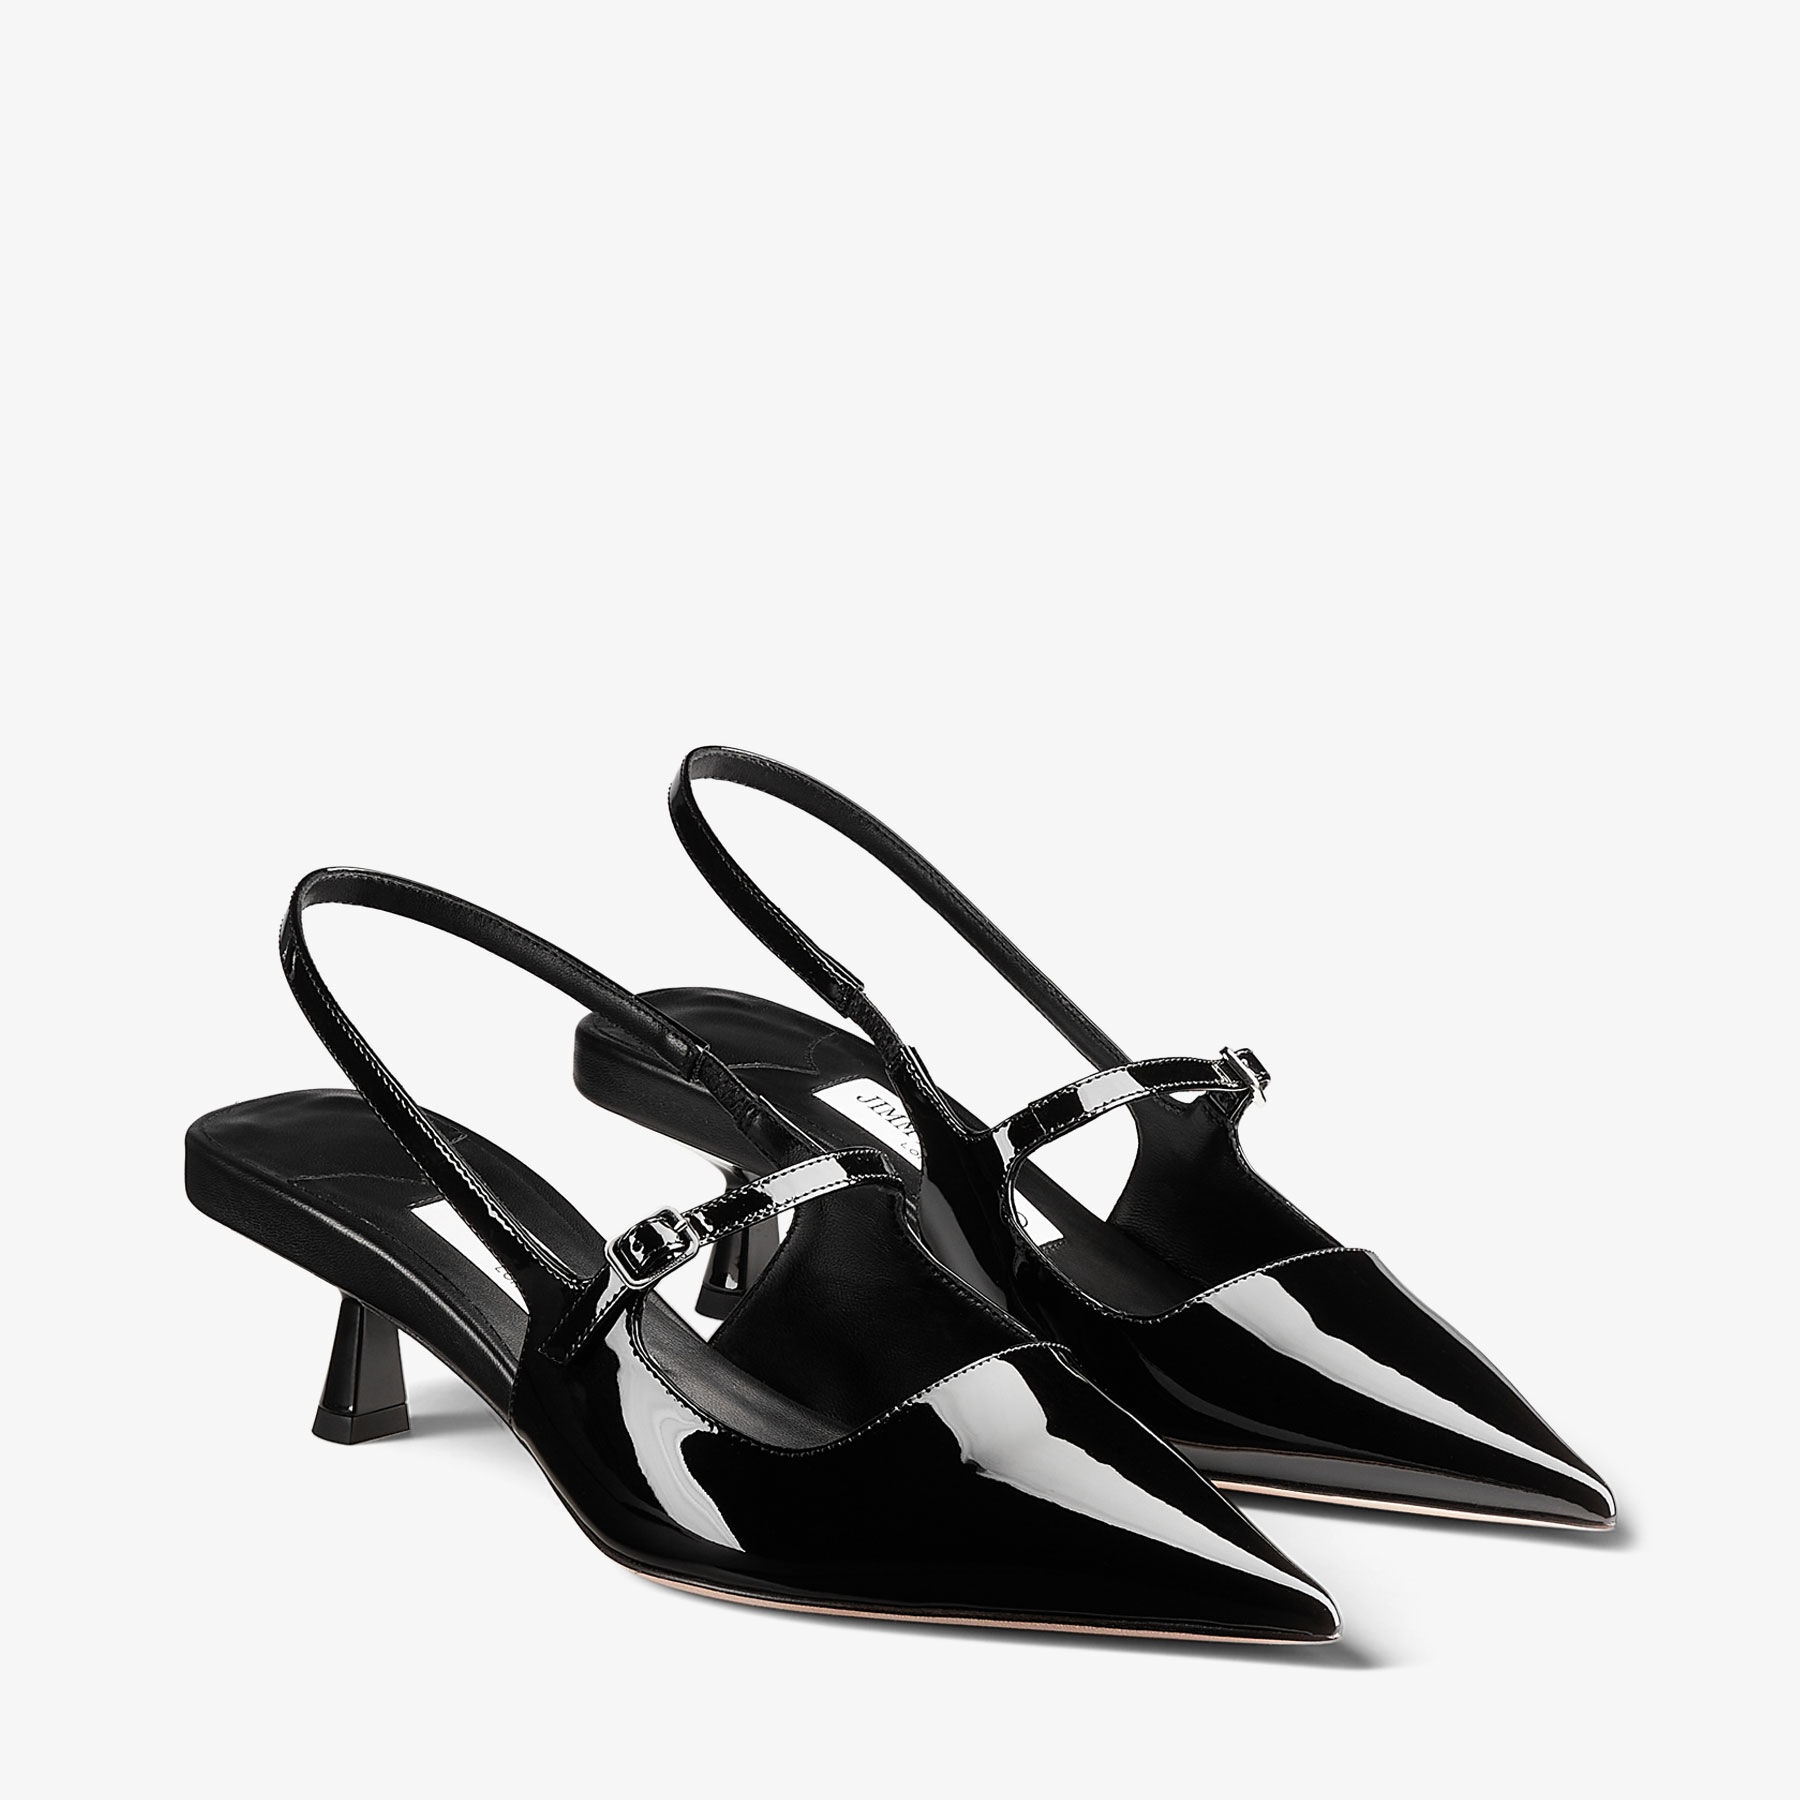 Didi 45
Black Patent Leather Pointed Pumps - 2